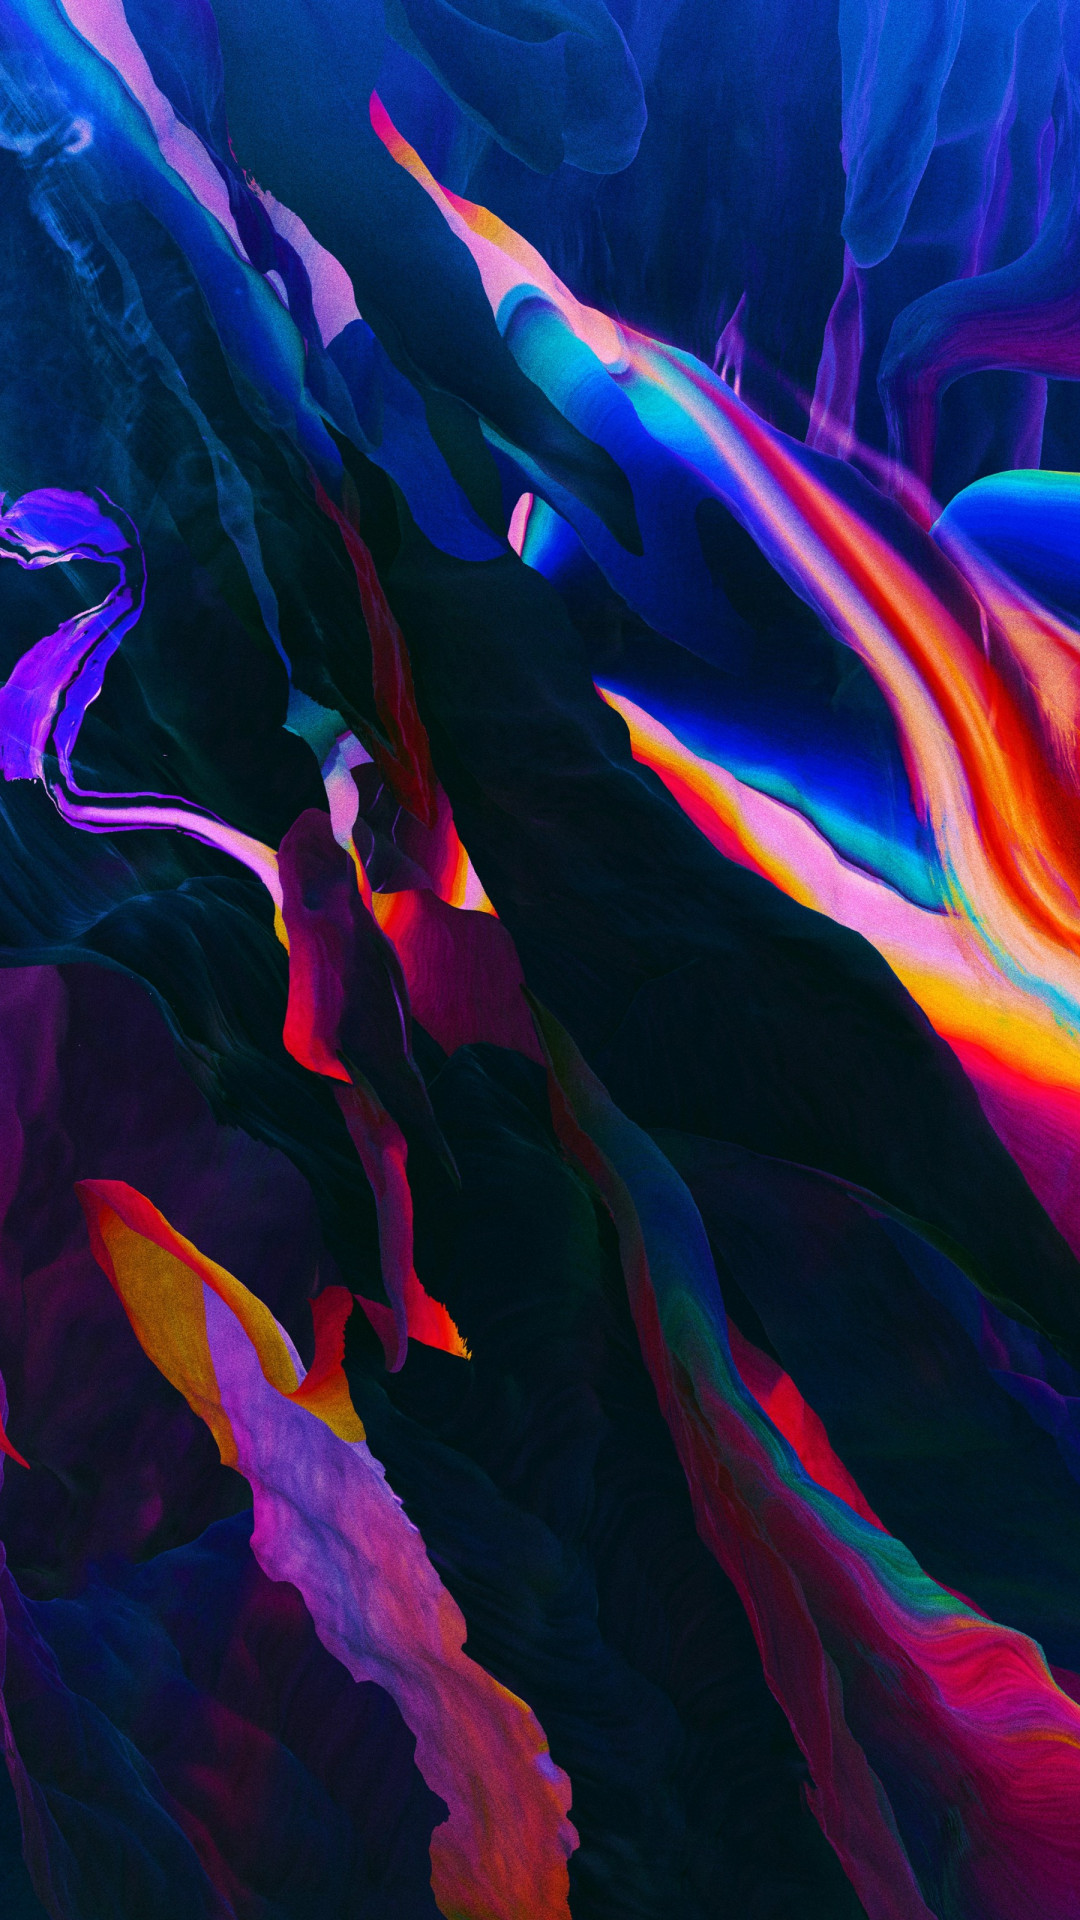 Download wallpaper abstract colorful x